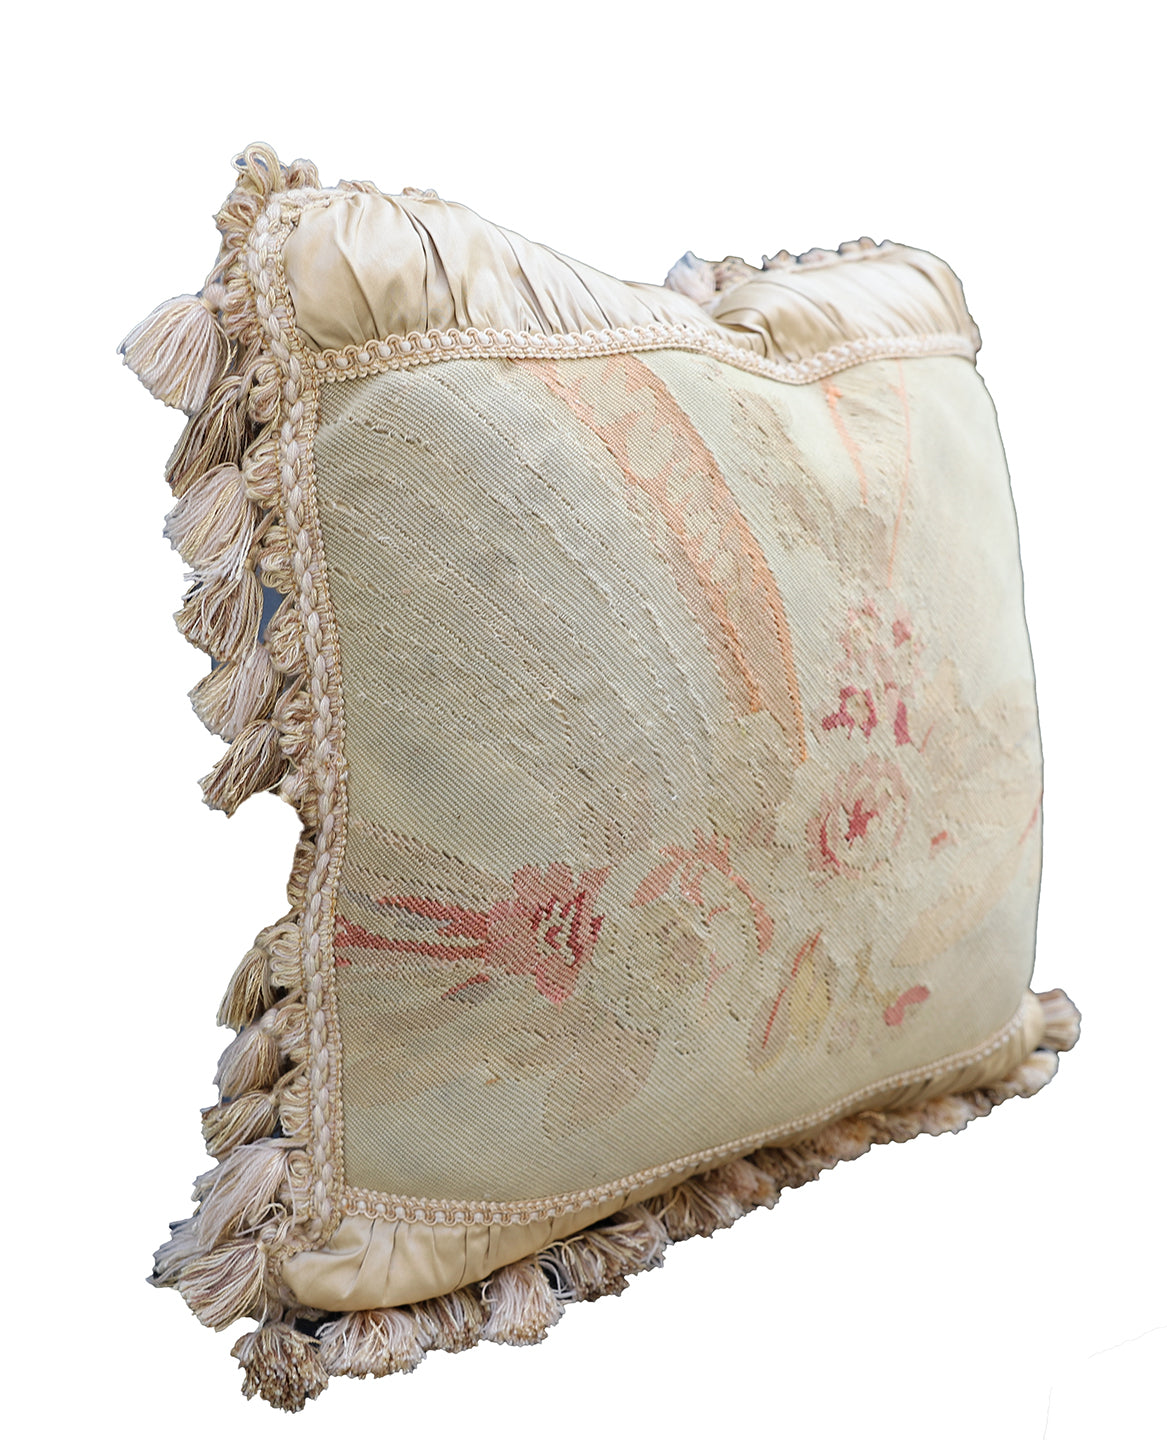 24" x 24" Silk and Wool Beige and Pink Vintage Aubusson Floral Pillow Case With Tassels